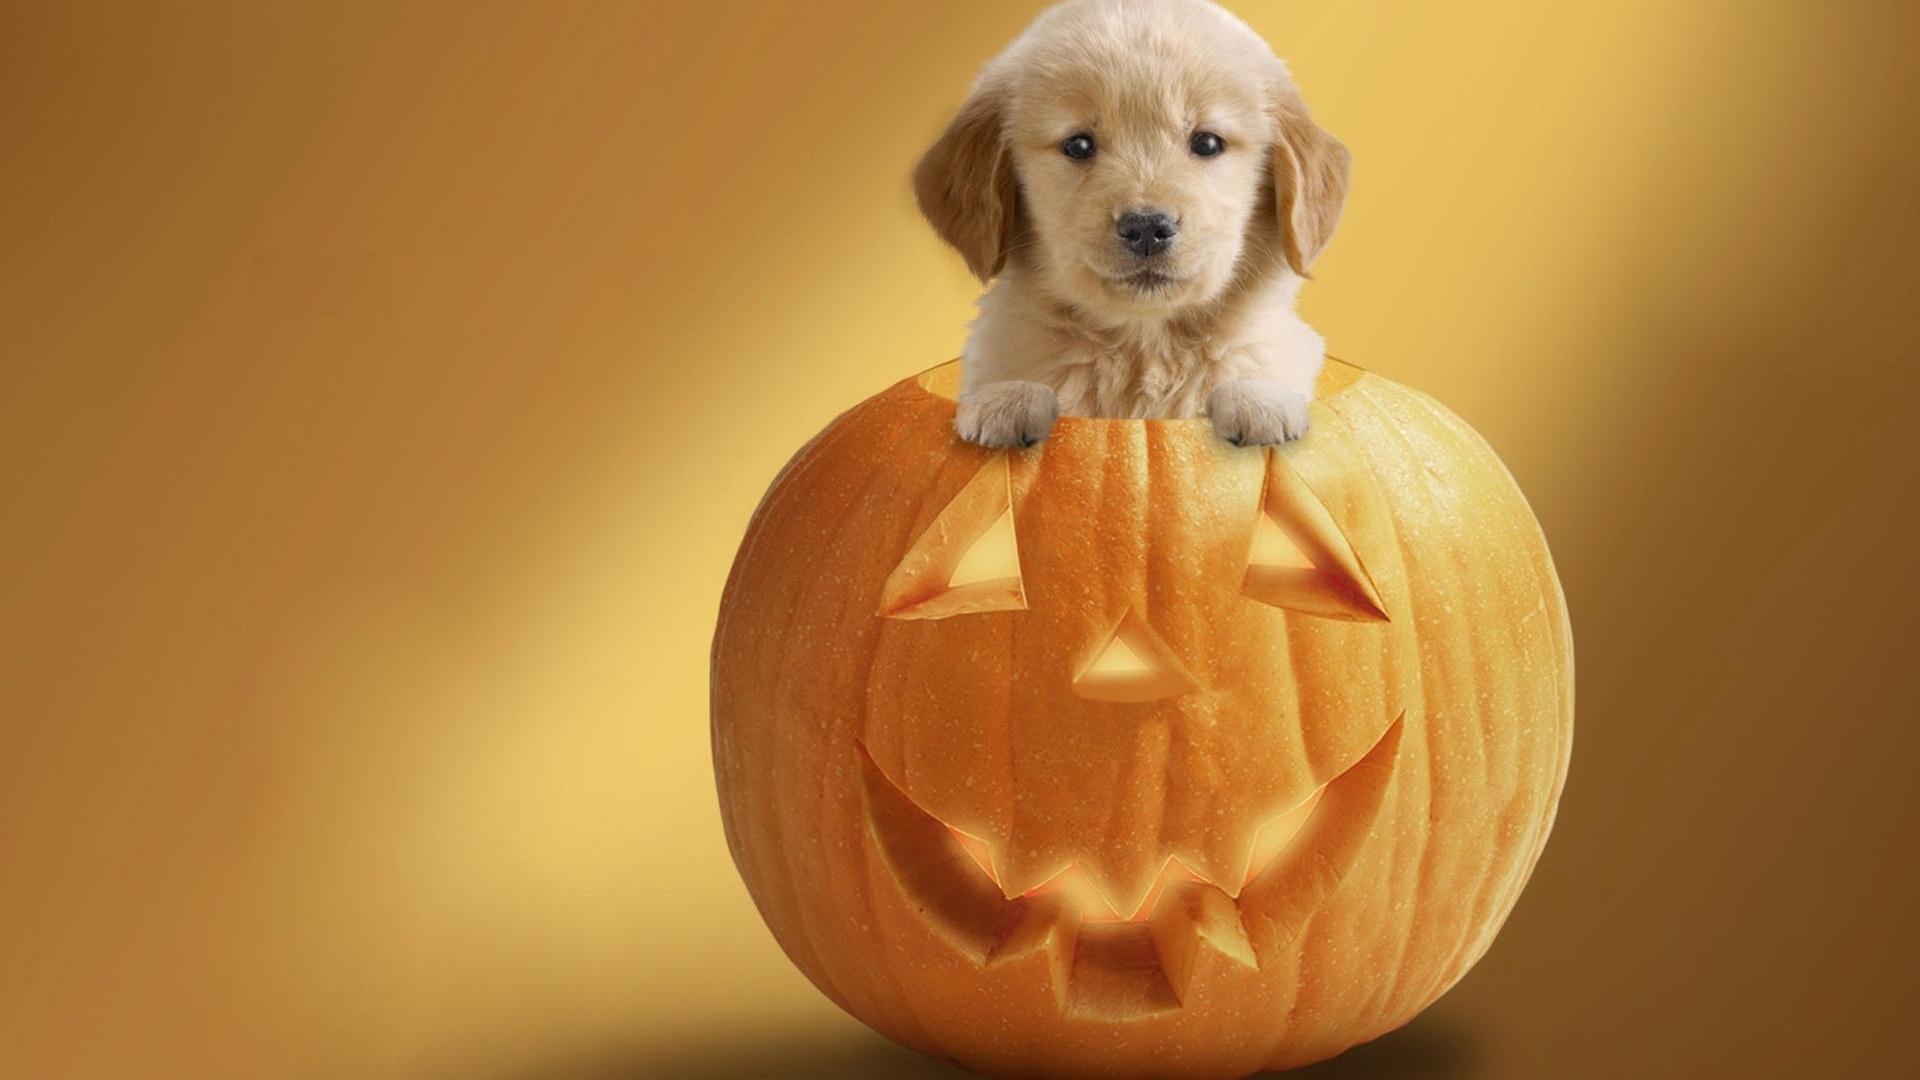 Dog Ready For Halloween for 1920 x 1080 HDTV 1080p resolution